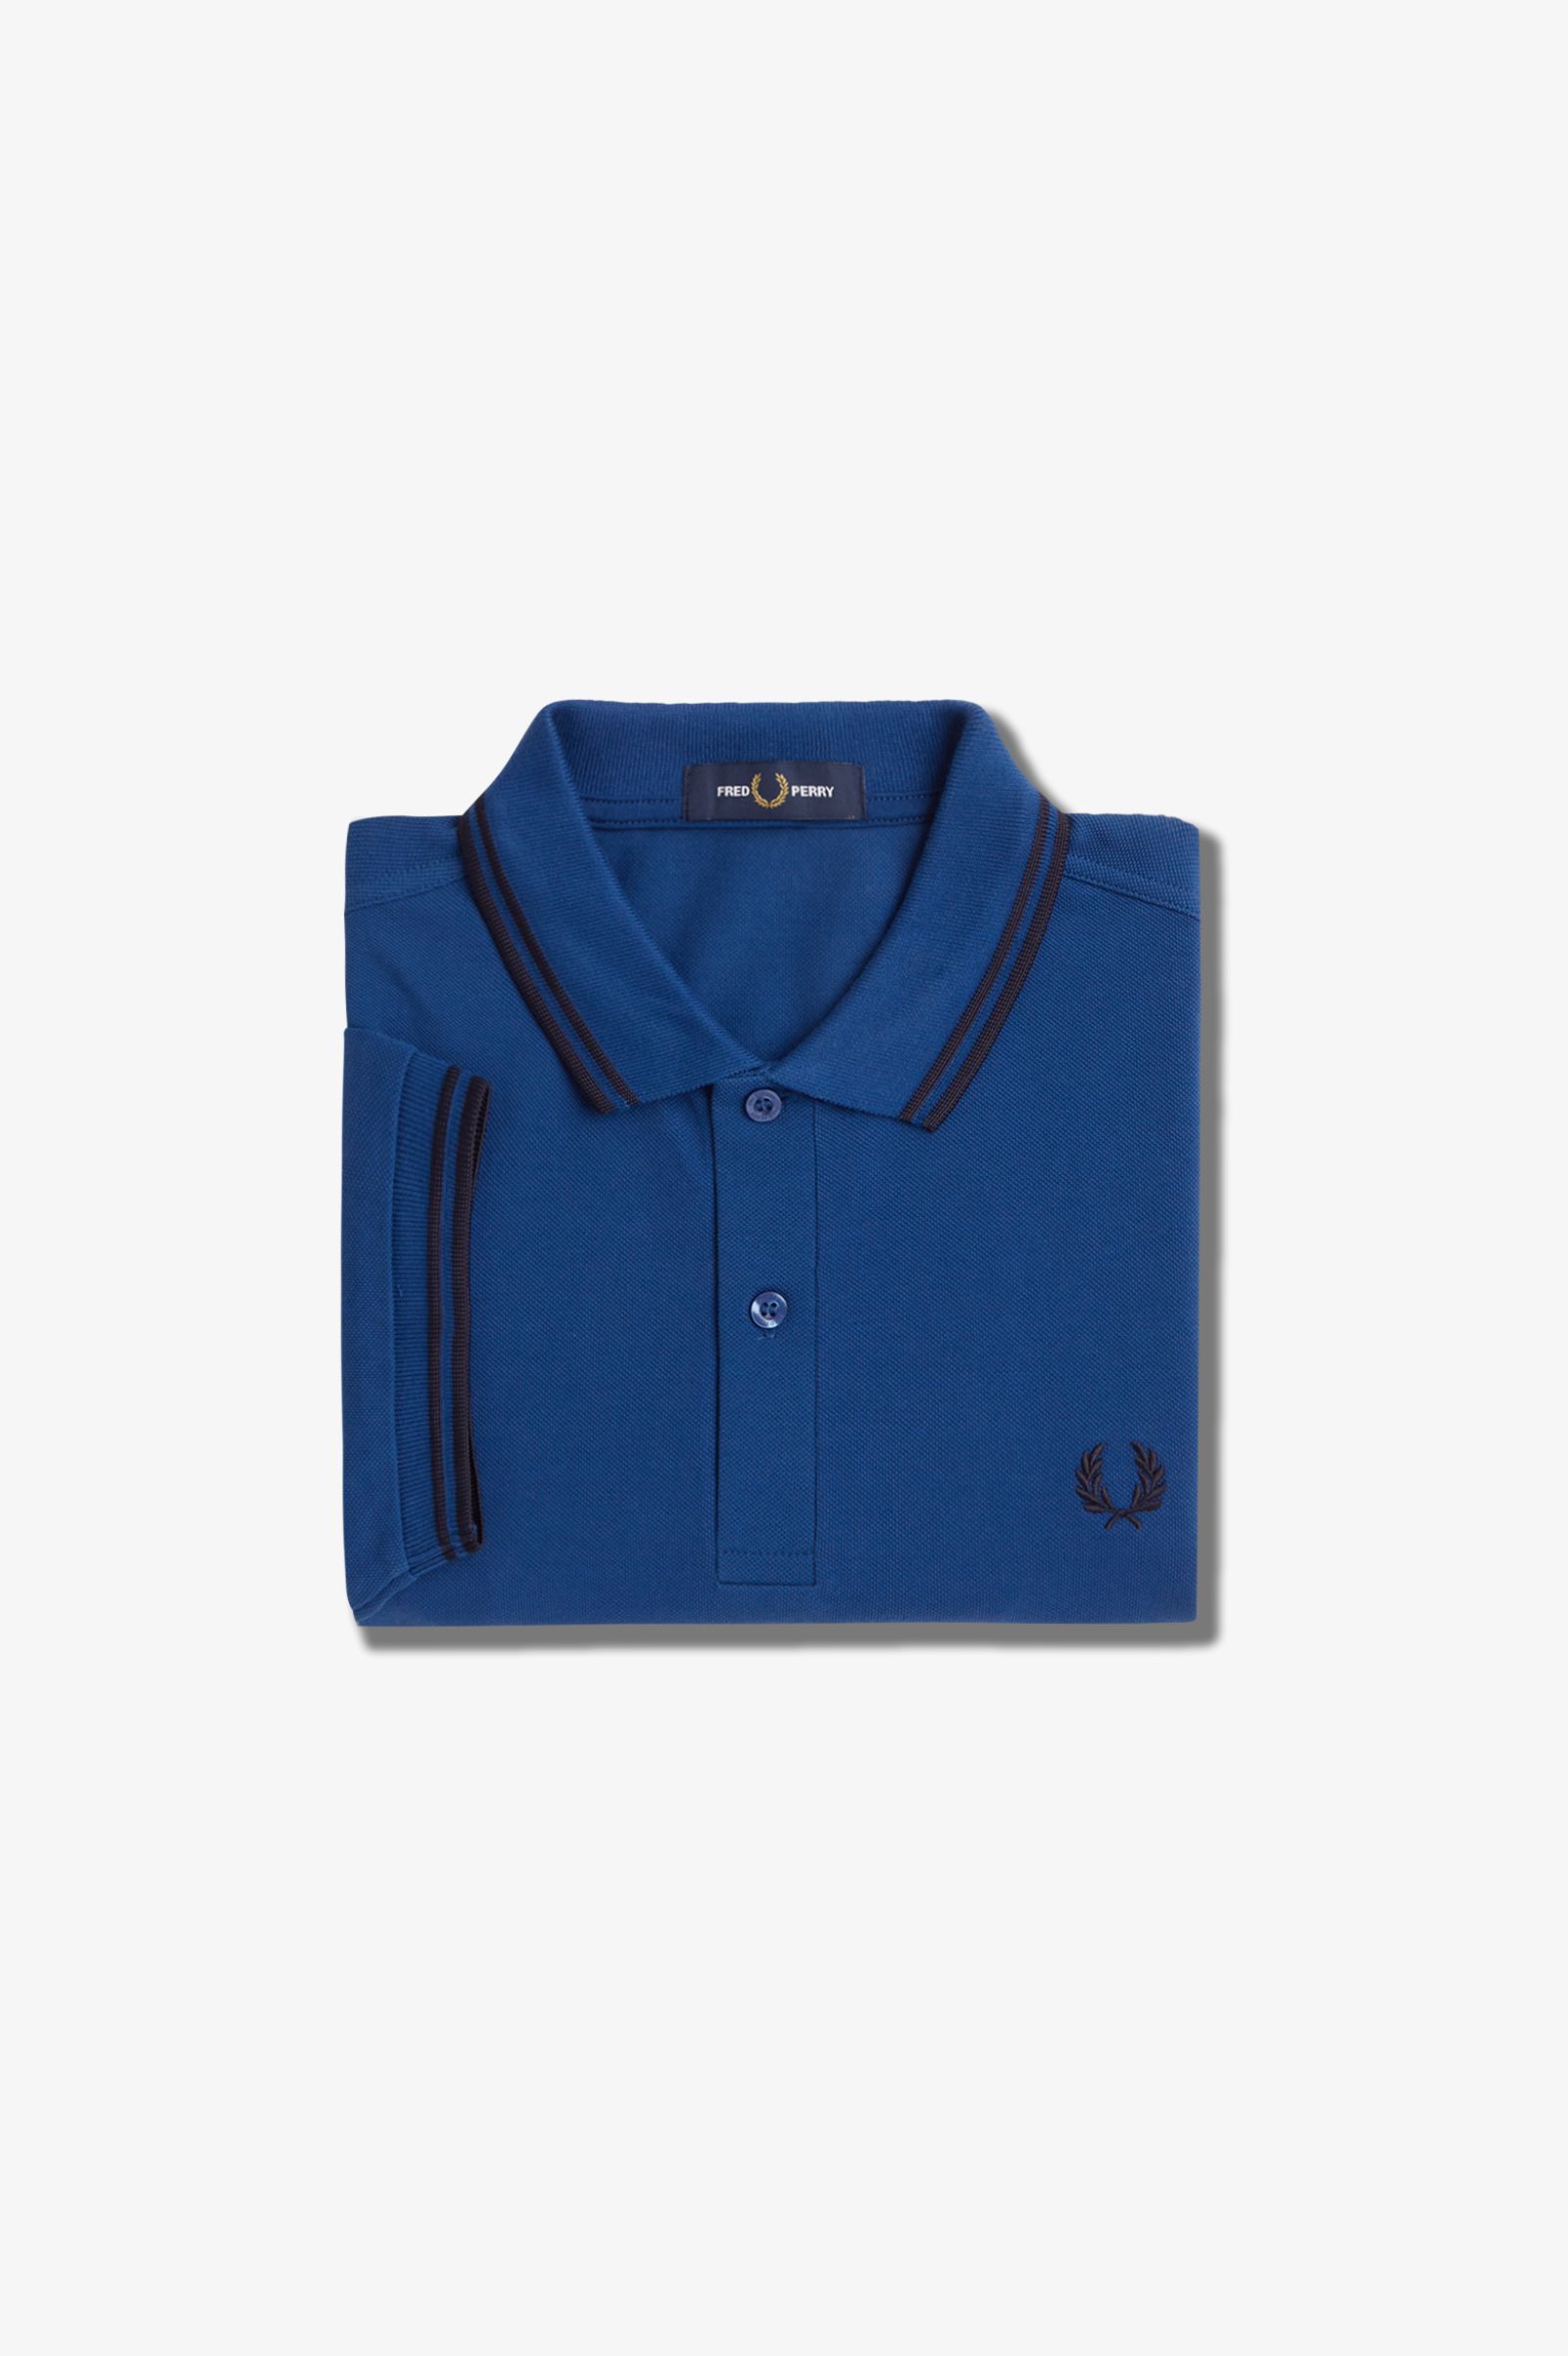 Jersey Fred Perry Hombre Azul Marino Ref.2124